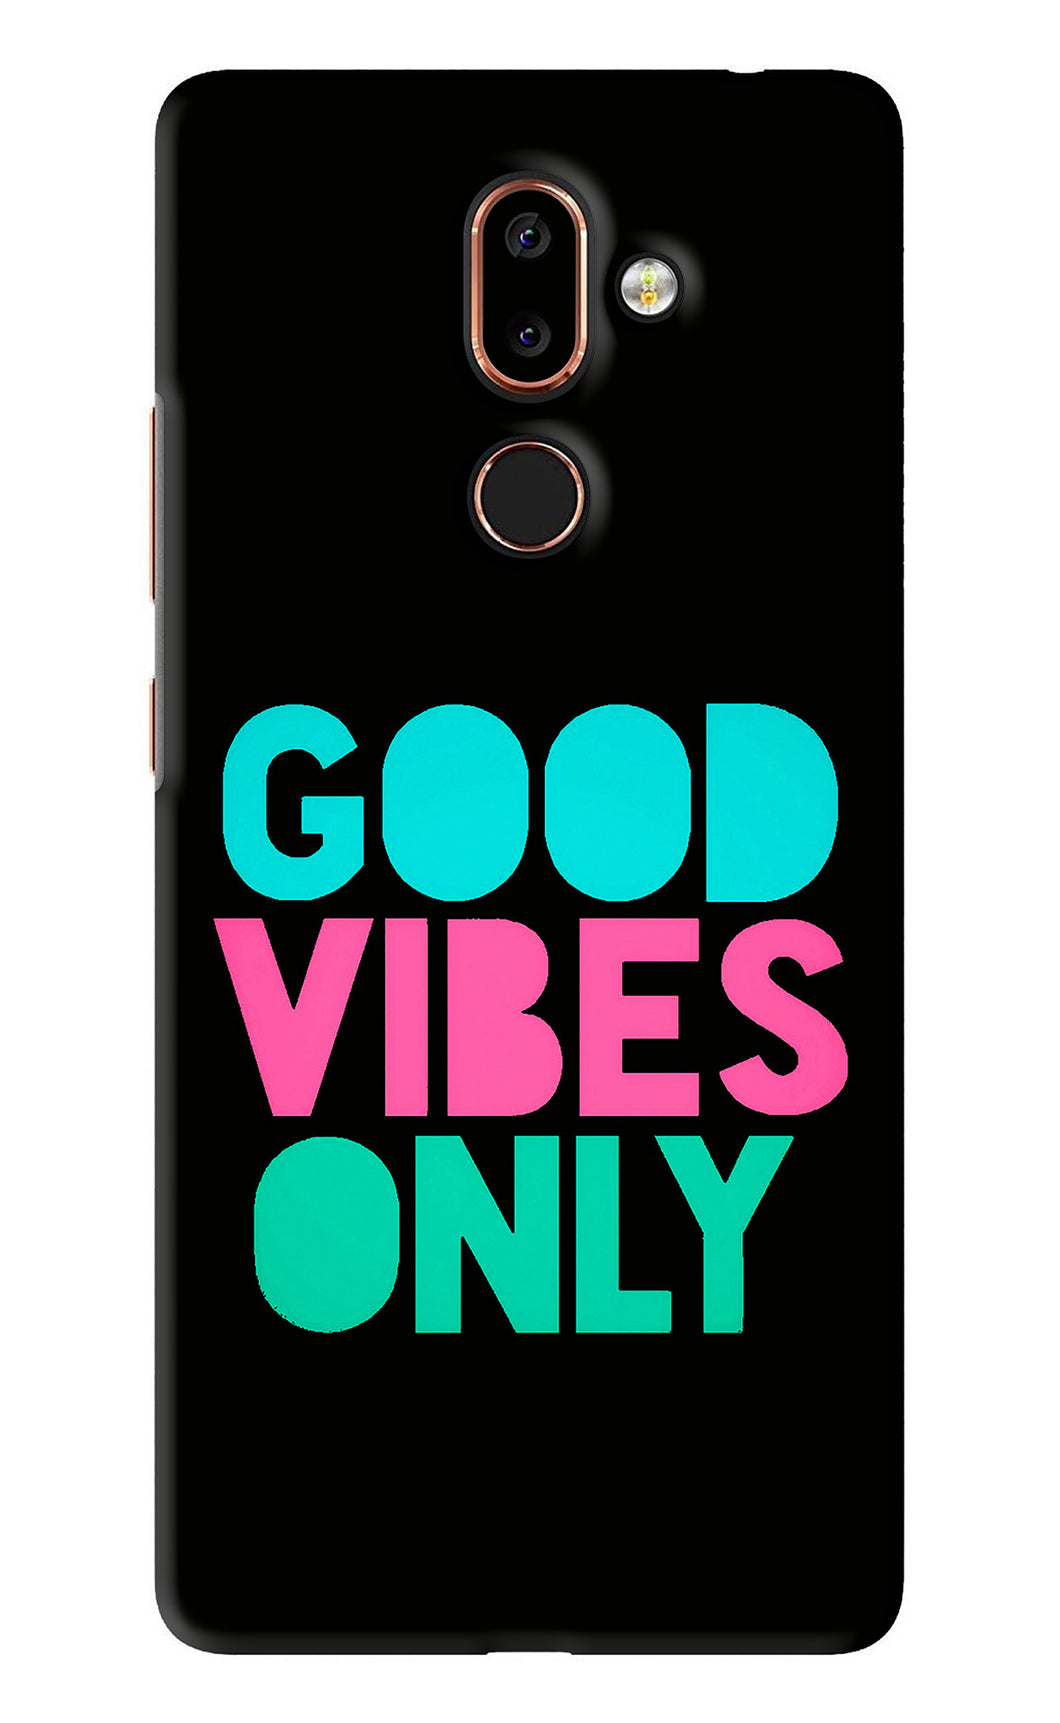 Quote Good Vibes Only Nokia 7 Plus Back Skin Wrap